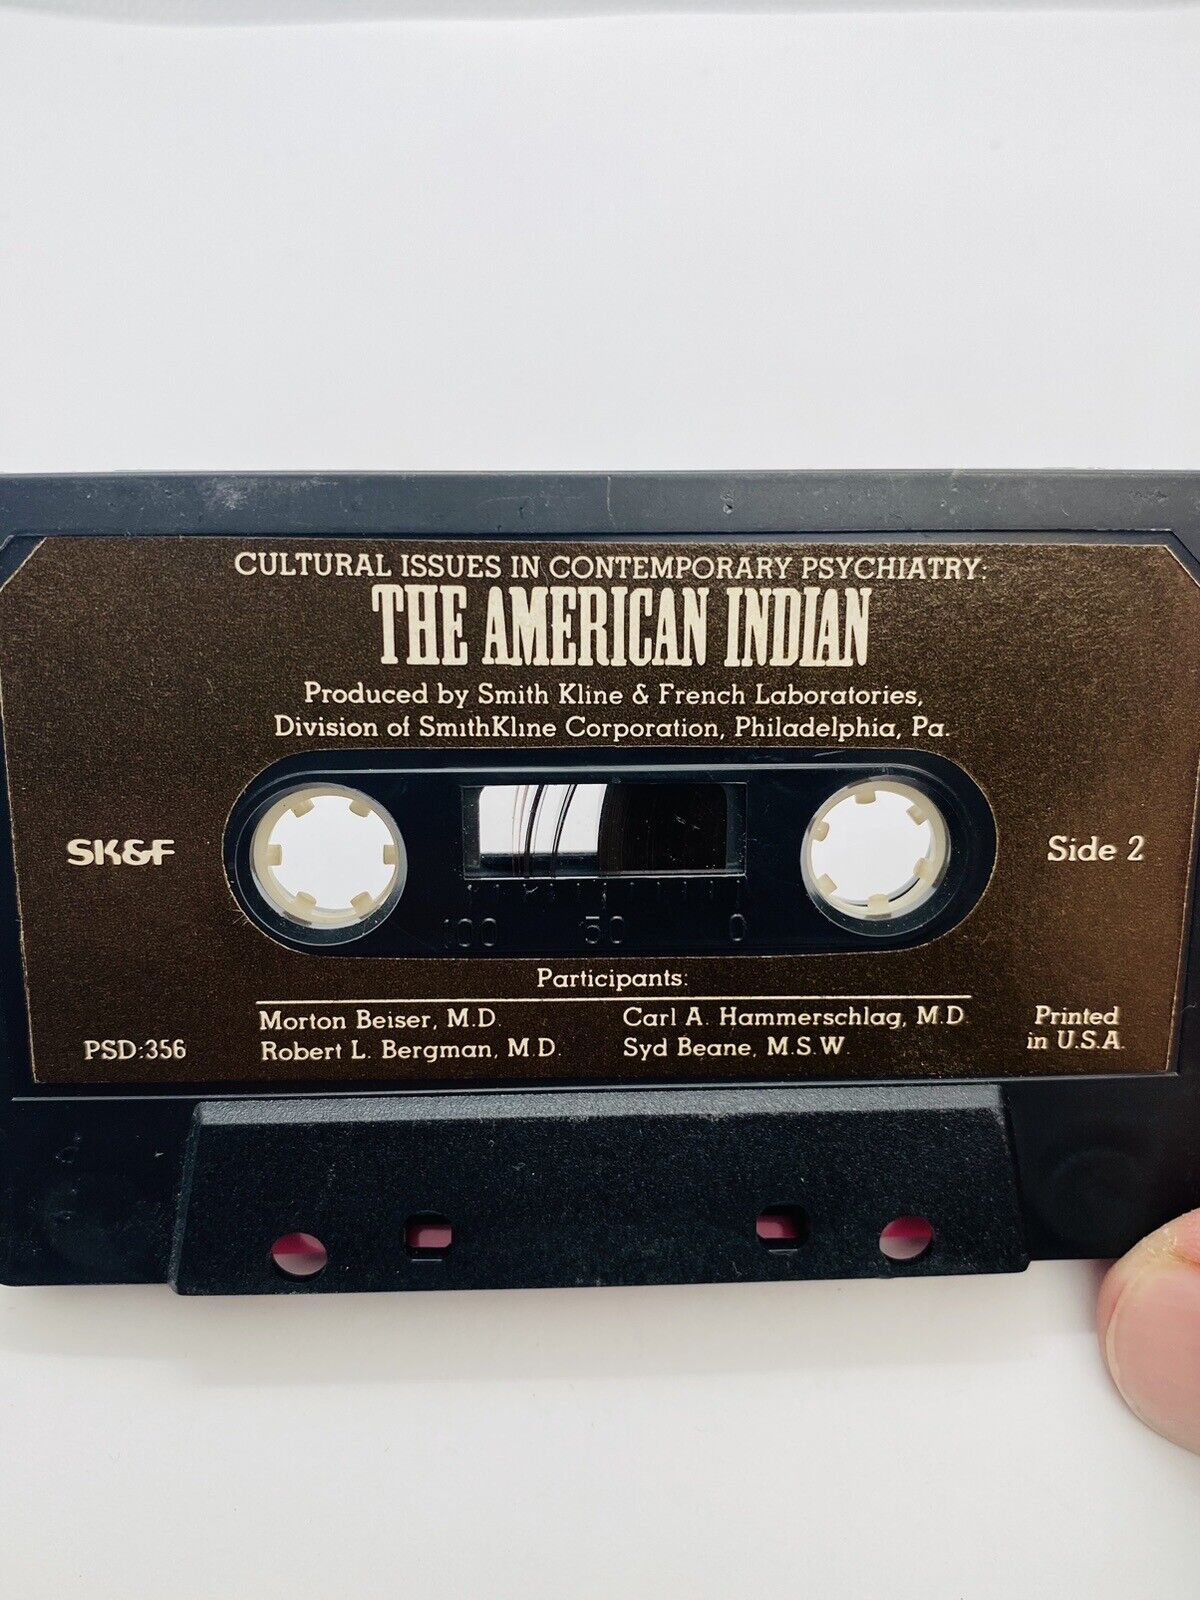 THE AMERICAN INDIAN CULTURAL ISSUES SMITH KLINE MEDICAL TAPE RARE 1976 CASSETTE